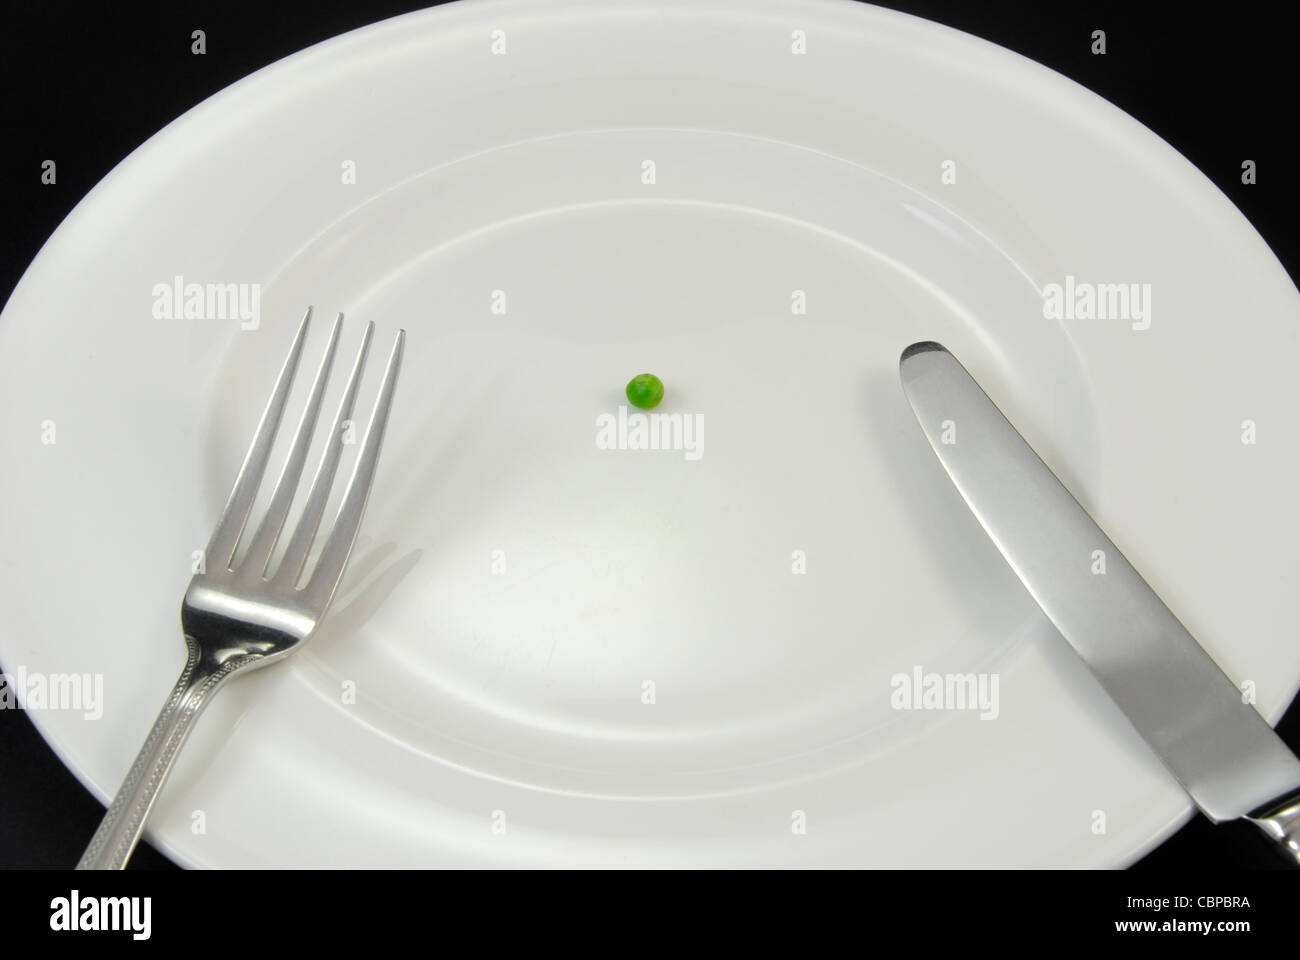 An exaggerated diet food menu consisting of a single pea on a plate with a knife and fork. Stock Photo